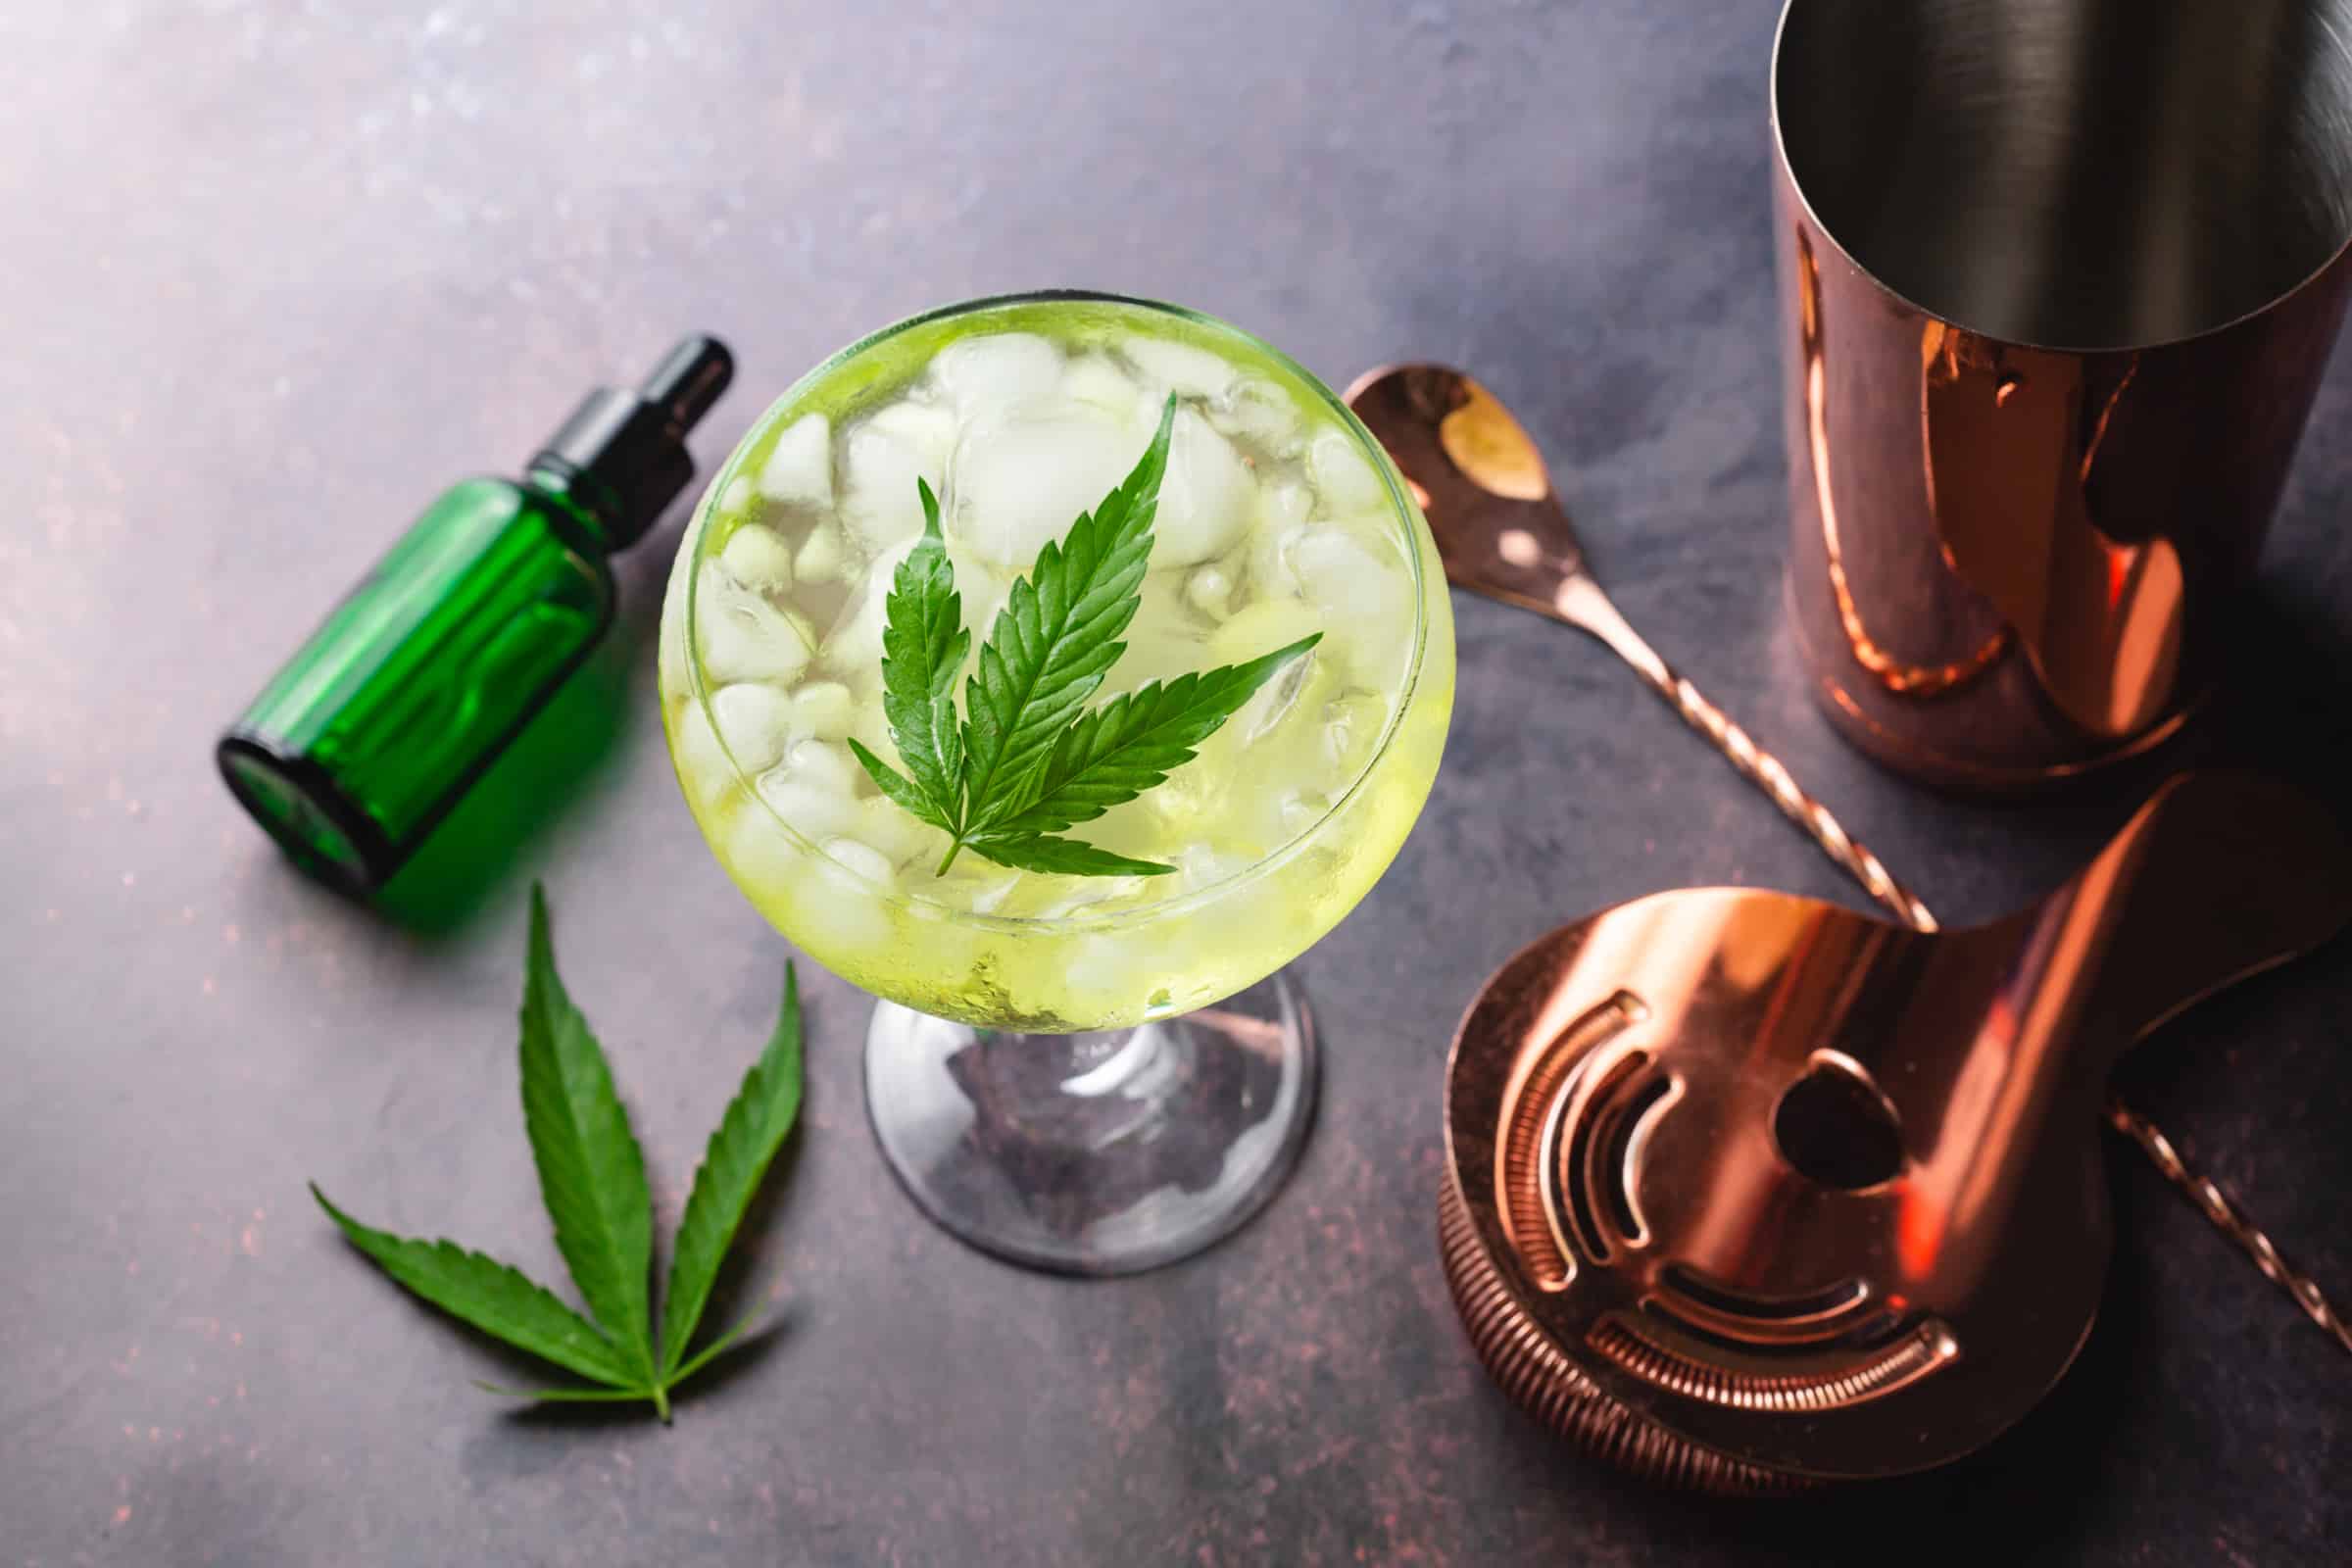 Ring in the New Year with Cannabis-Beverage Alcohol Alternatives